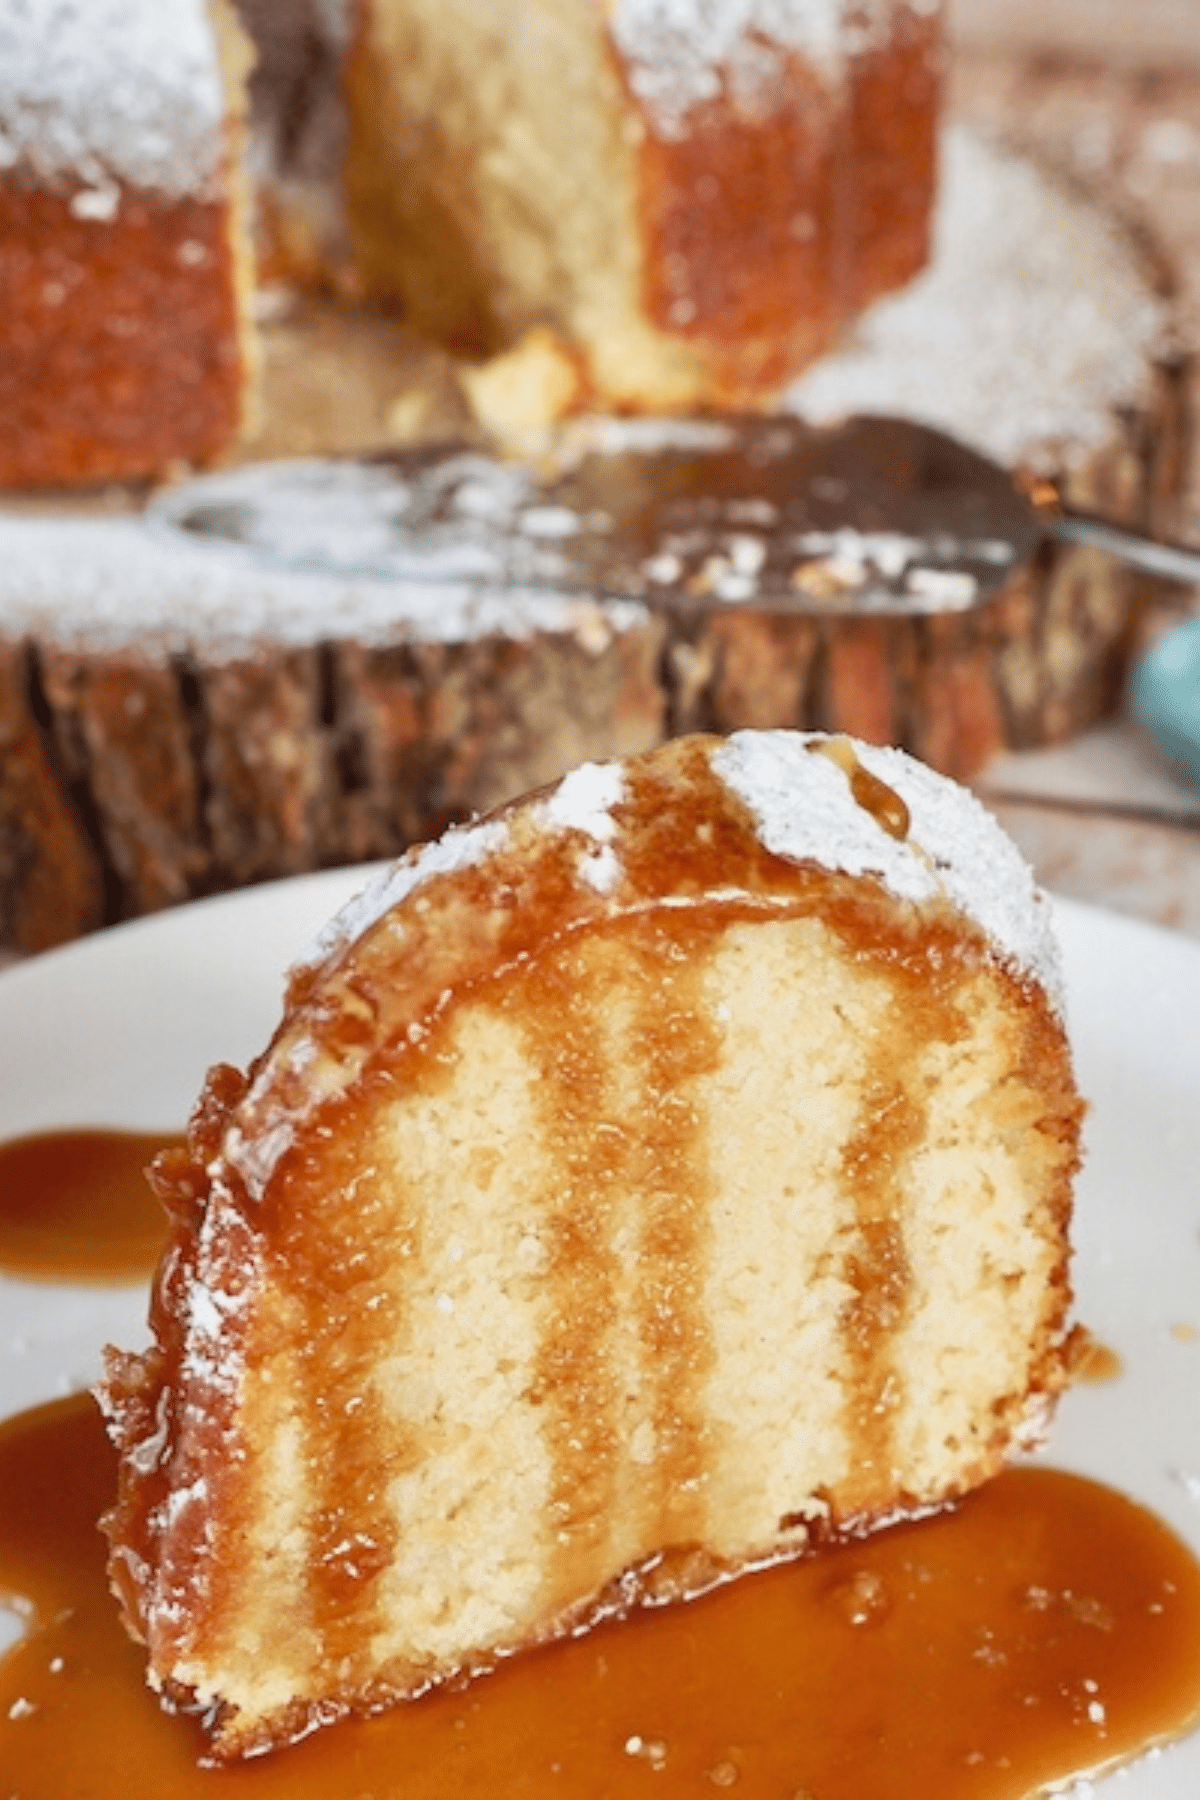 Kentucky Butter cake old fashioned butter pound cake with bourbon vanilla sauce on top.